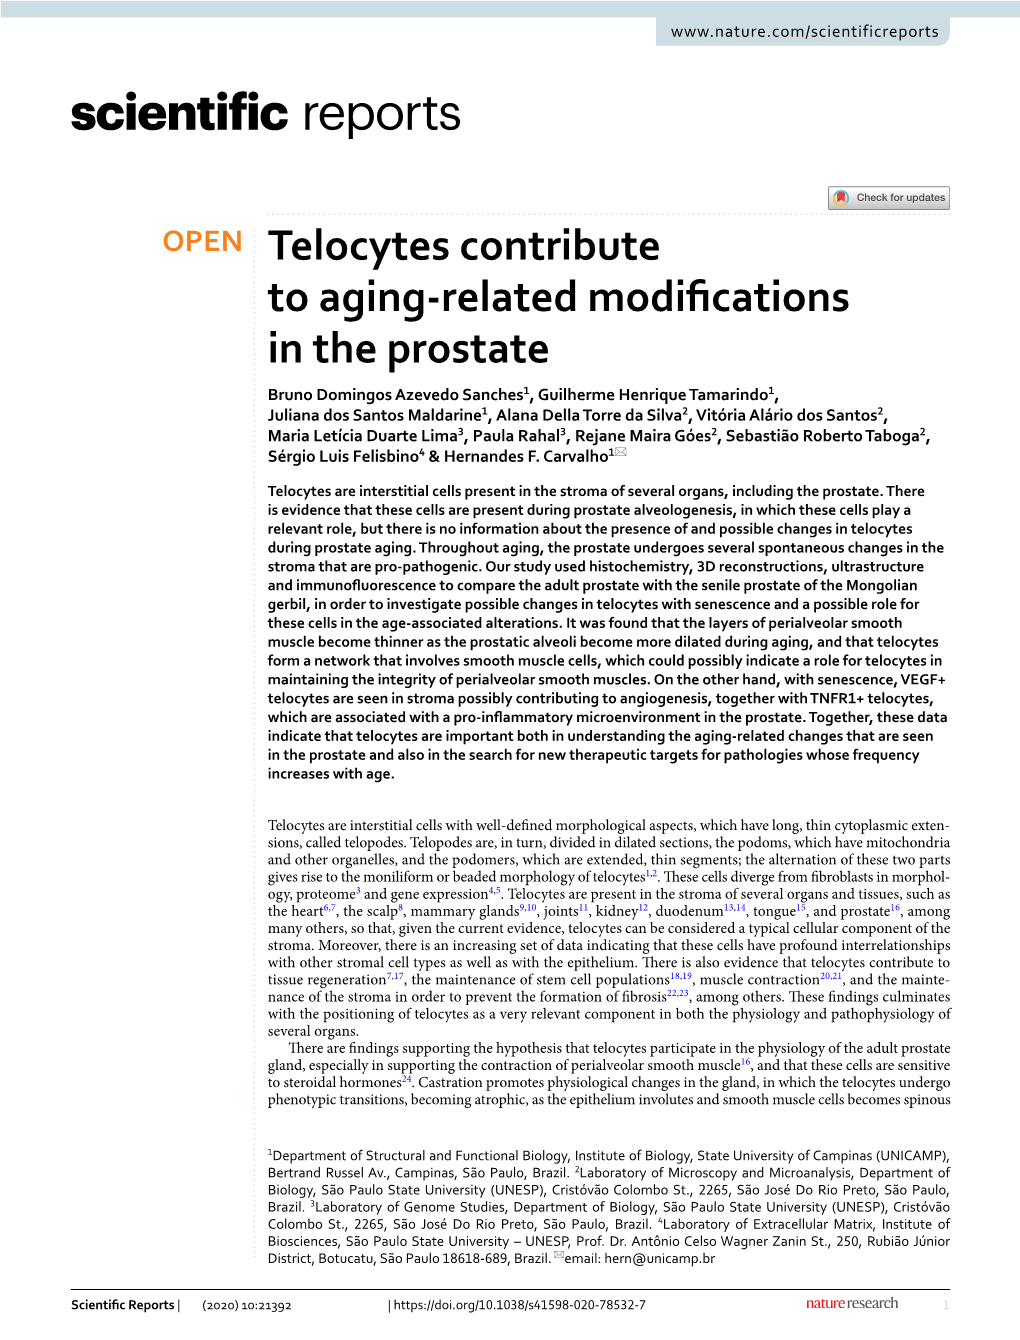 Telocytes Contribute to Aging-Related Modifications in the Prostate